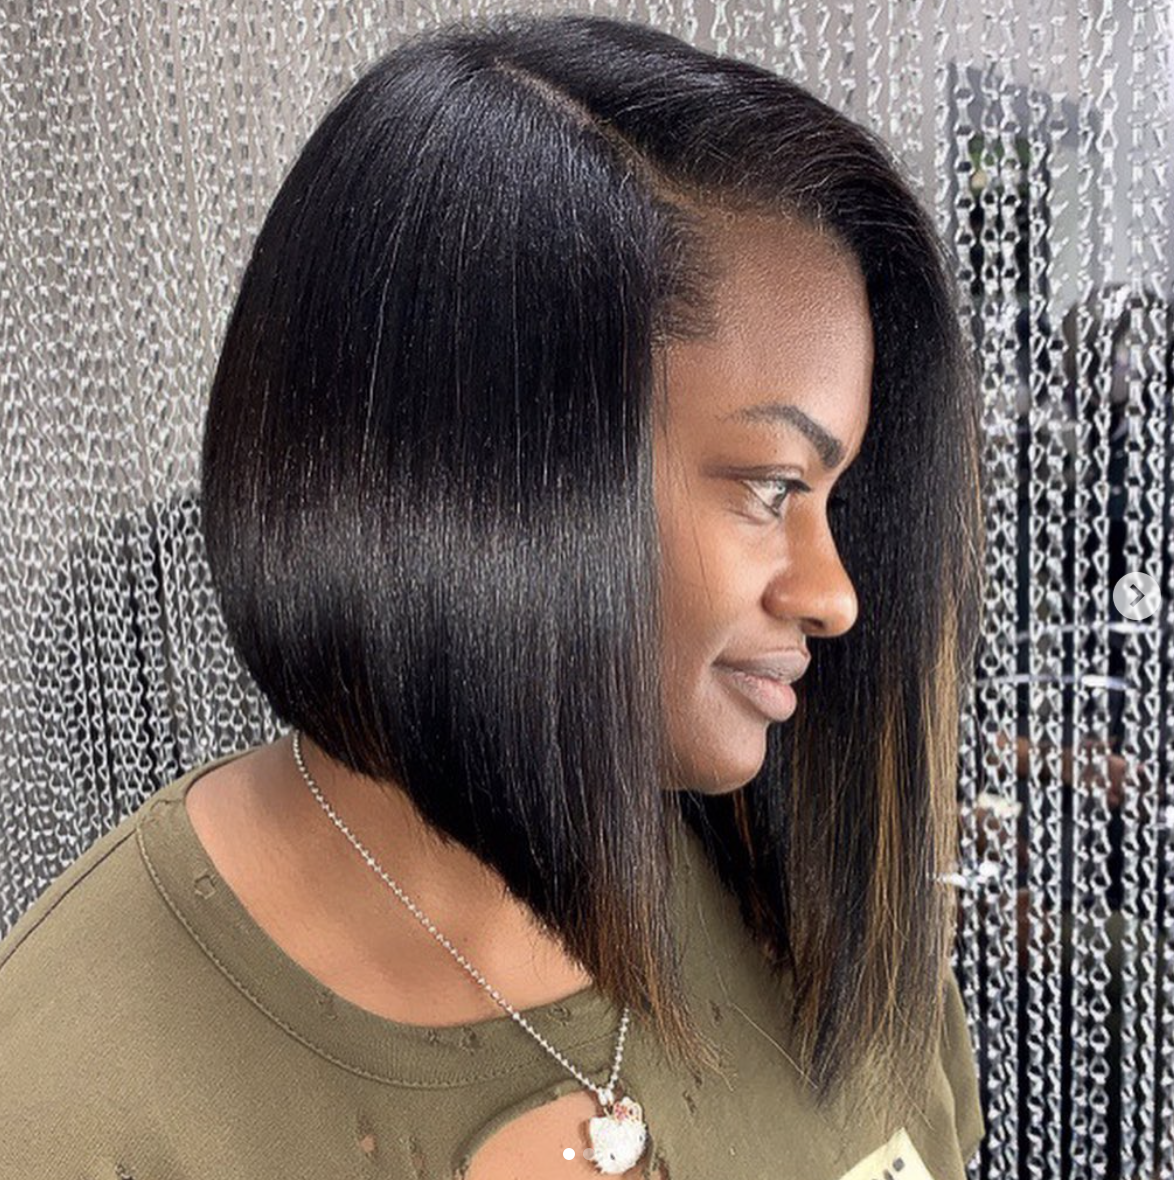 How To Do A Silk Press On Natural Hair Professionally At Home